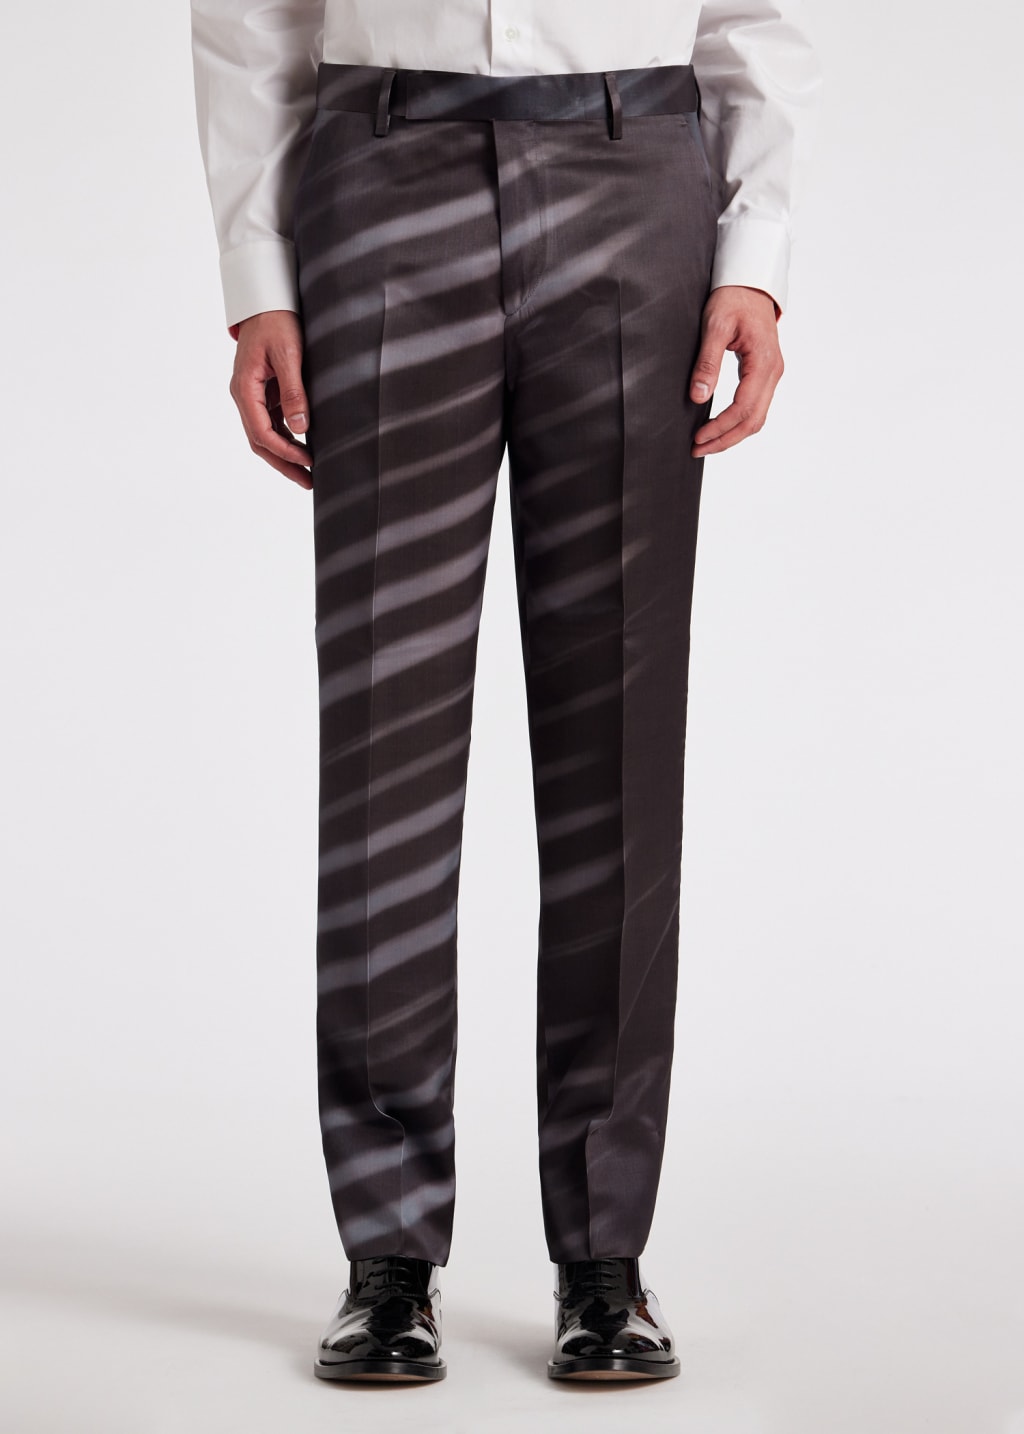 Model View - Tailored-Fit 'Morning Light' Viscose-Wool Suit by Paul Smith